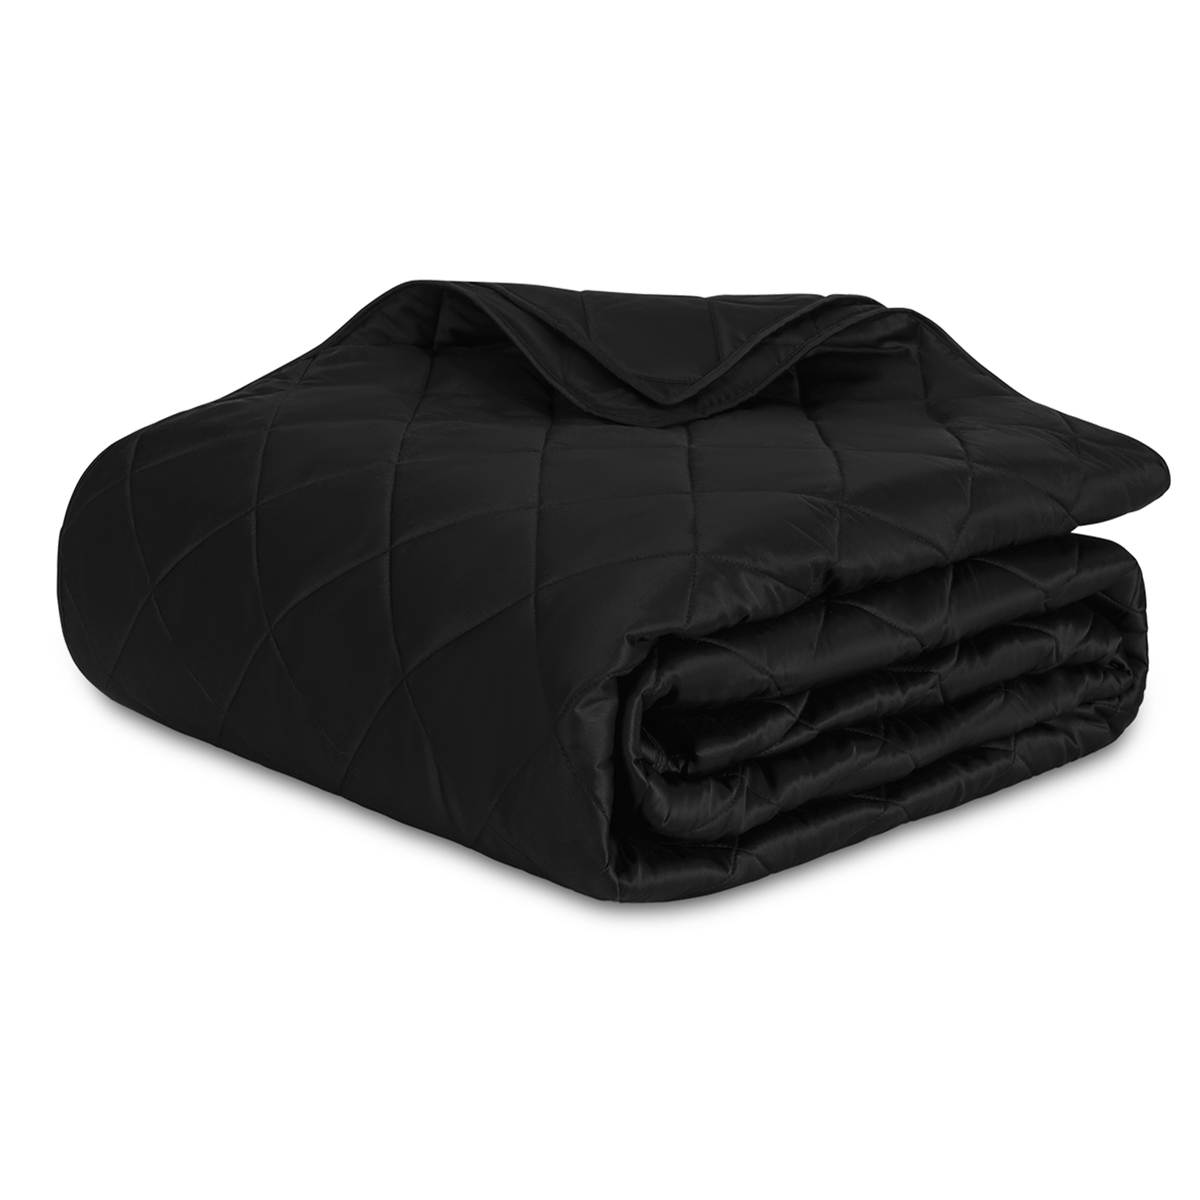 Silo Image of Matouk Nocturne Quilted Bedding Quilt in Black Color